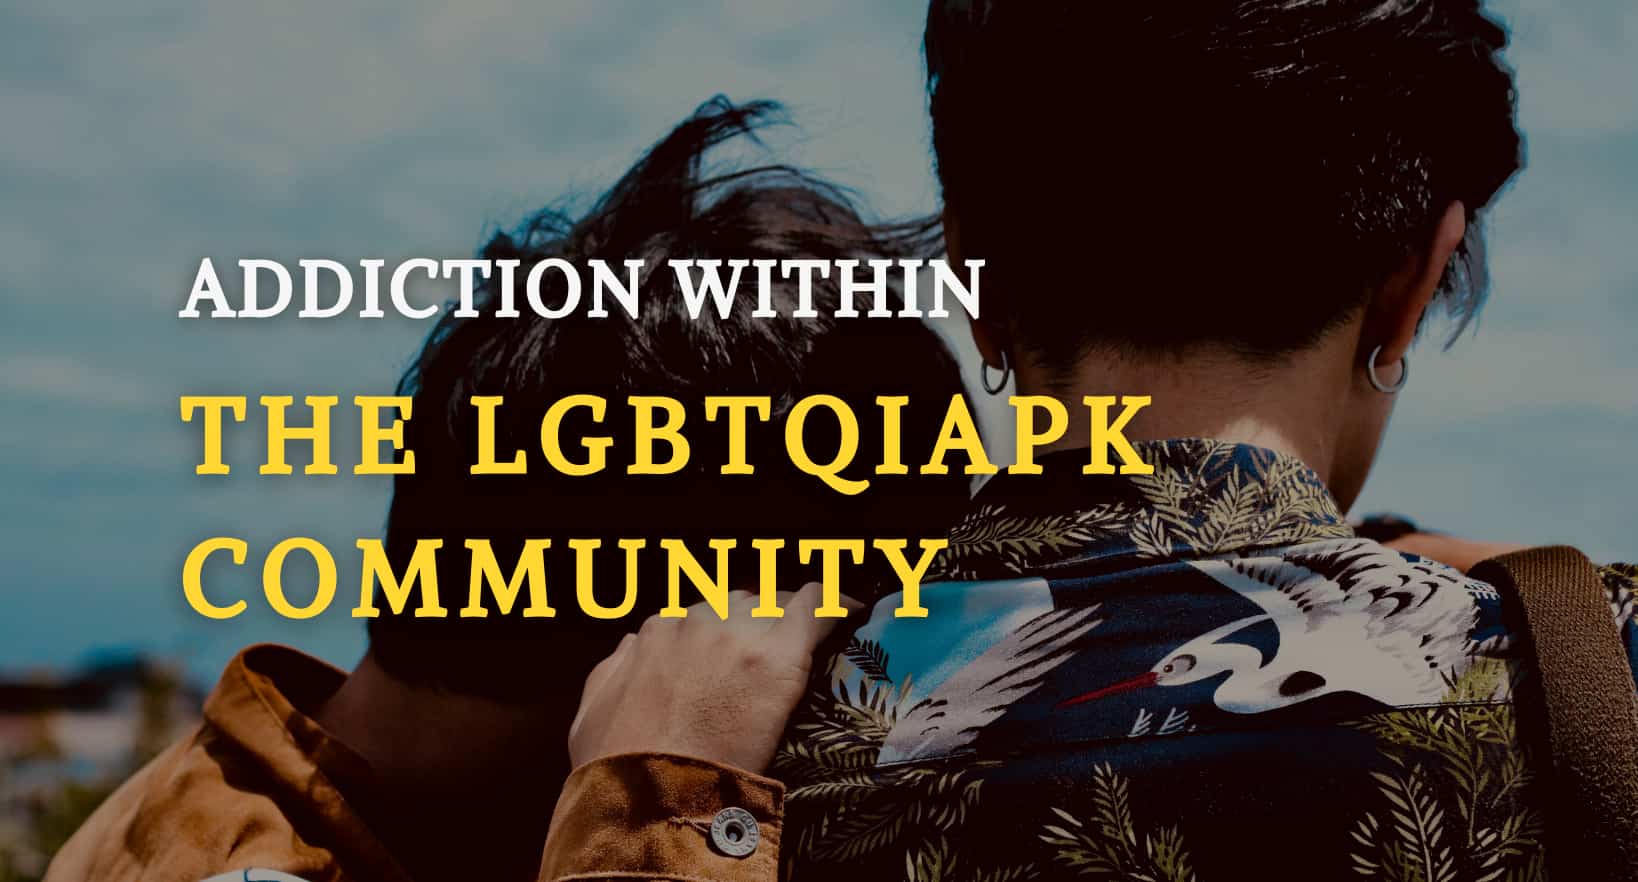 Two members who suffer from addiction in the LGBTQIAPK community.